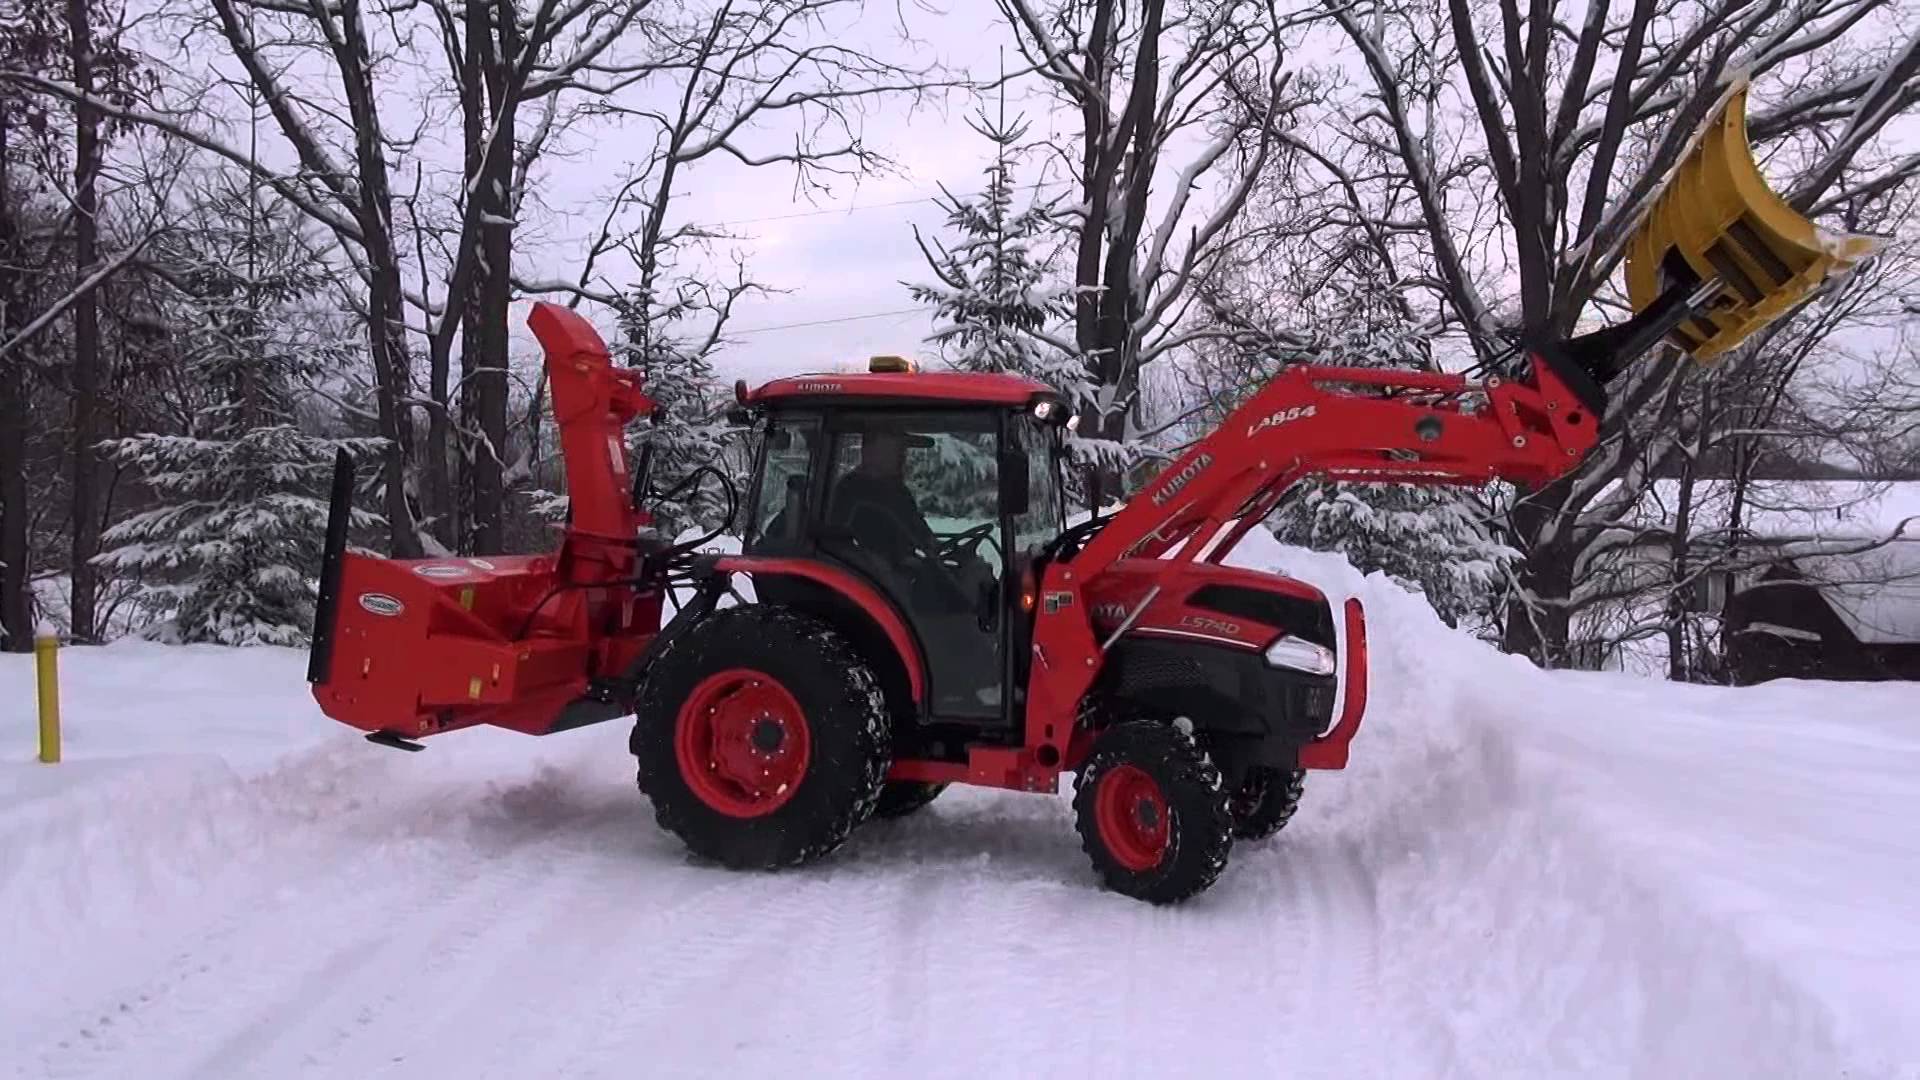 Charles Operating A Kubota L5740....Serious Snow Removal! - YouTube